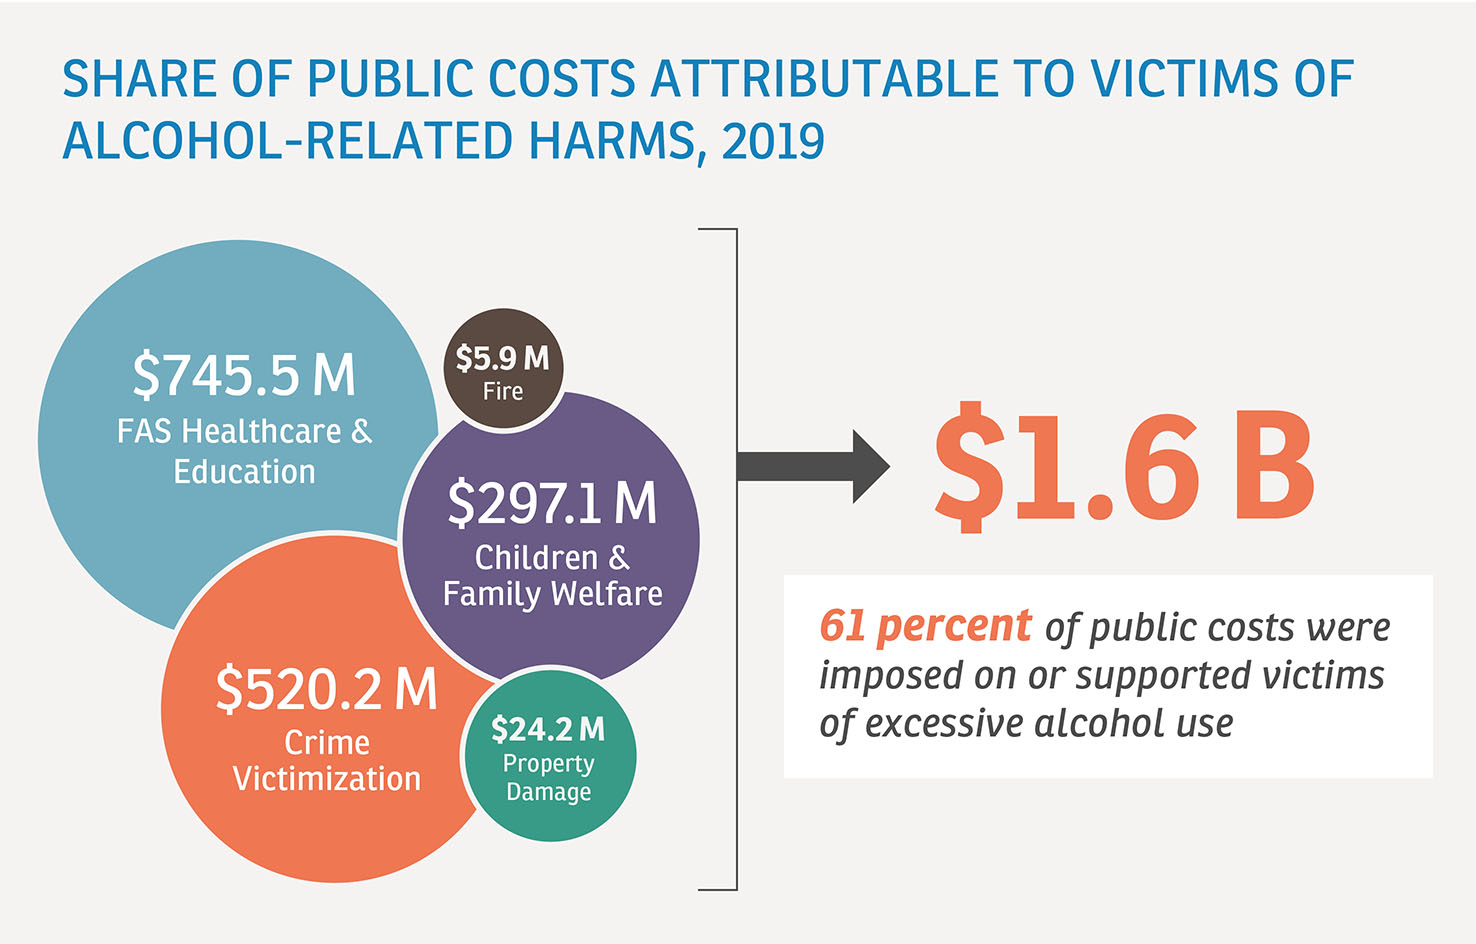 SHARE OF PUBLIC COSTS ATTRIBUTABLE TO VICTIMS OF ALCOHOL-RELATED HARMS, 2019. Chart showing multiple factors ((FAS Healthcare & Education, fire, Children & Family Welfare, crime victimization and property damage) all total to $1.6 billion in costs.